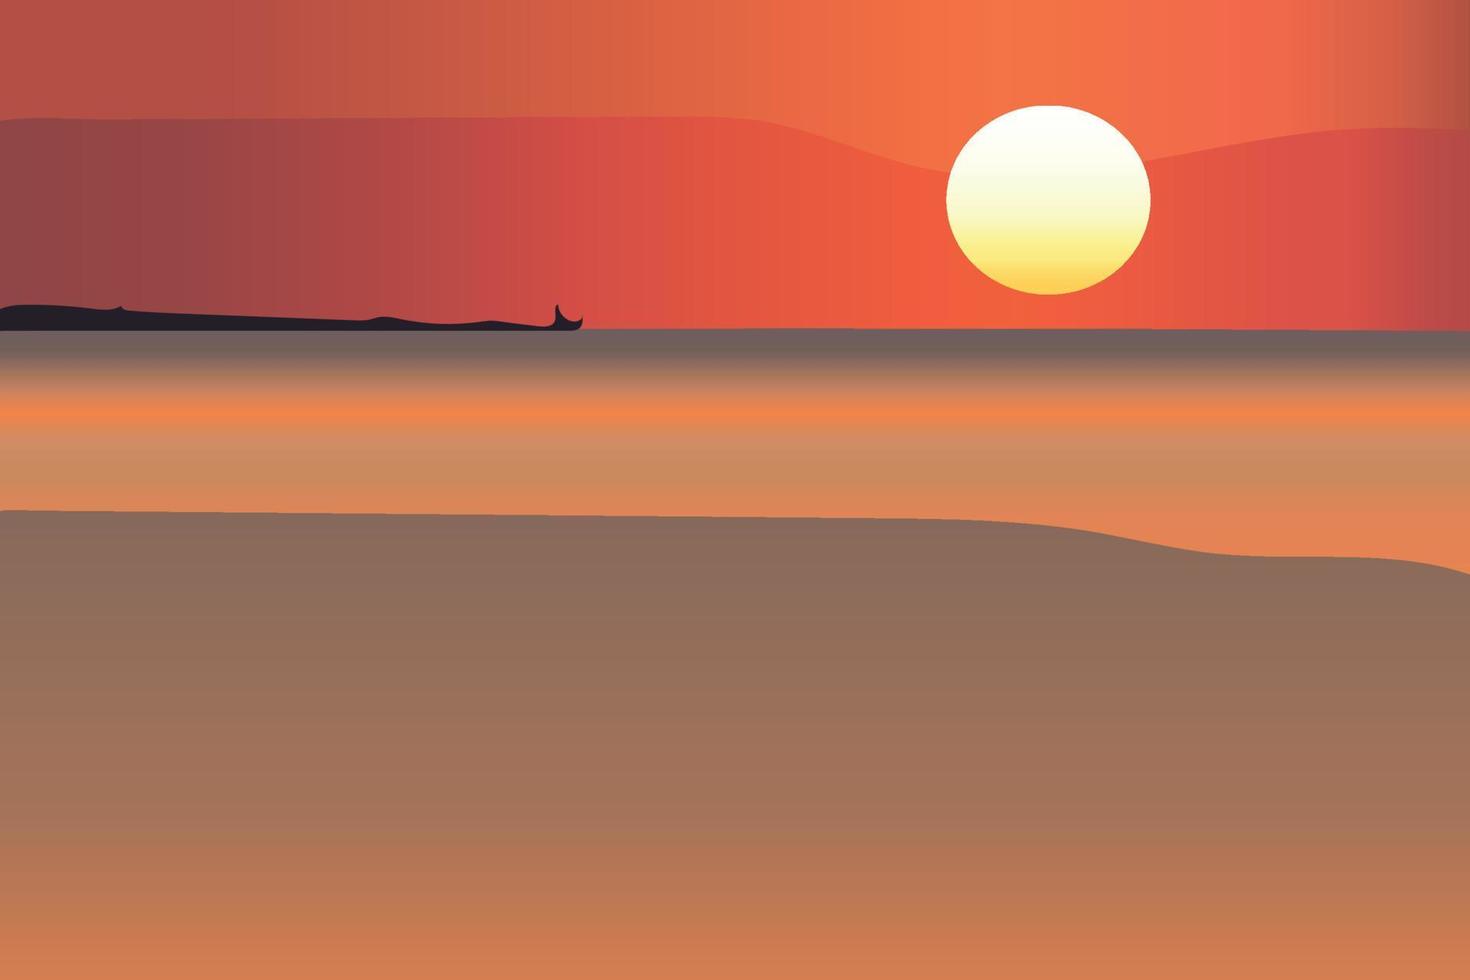 sunset on the beach. sunset view with orange sea, clouds in orange red sky, silhouette on black hills. vector